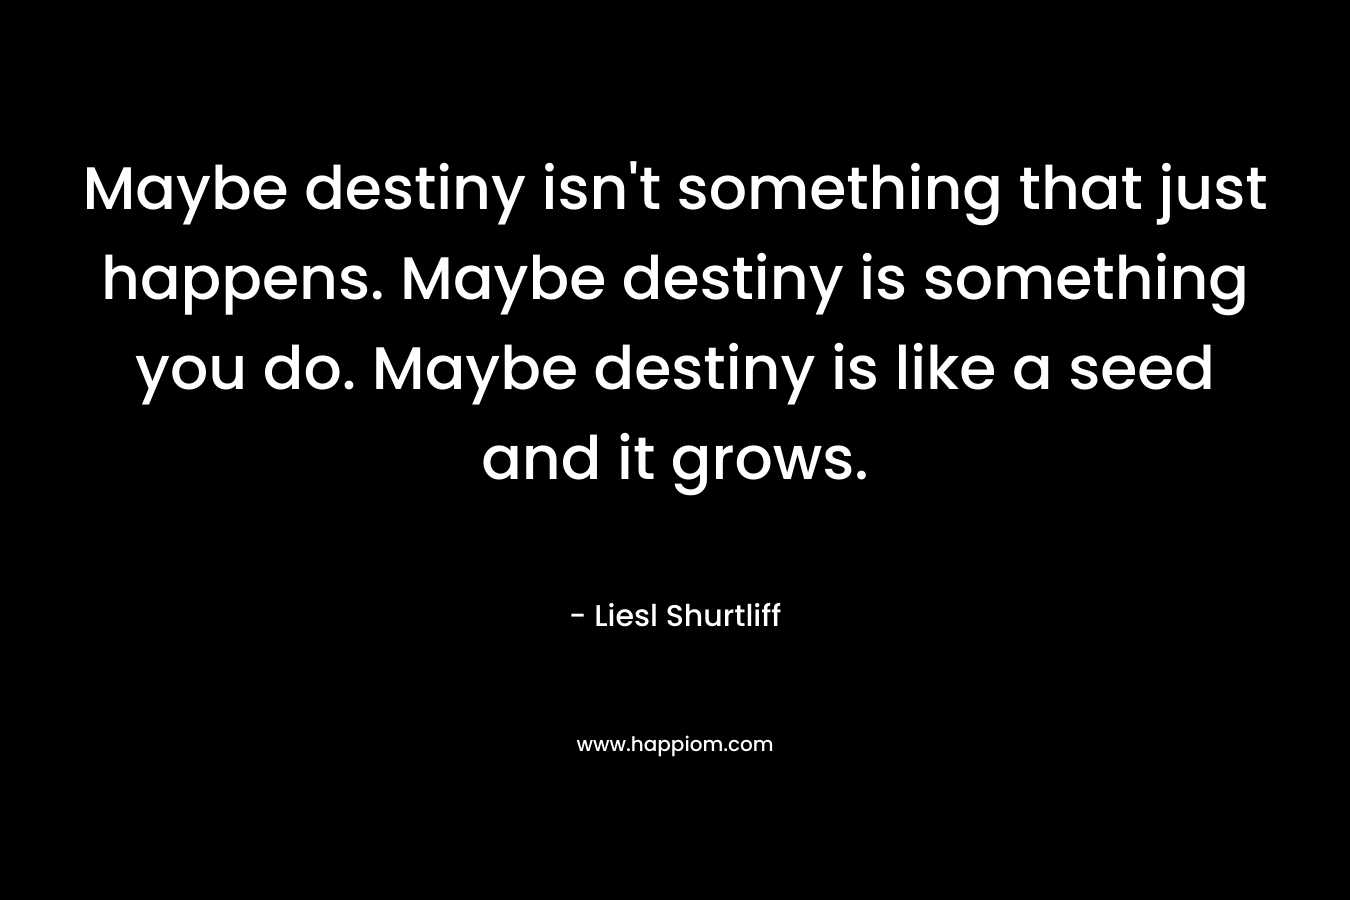 Maybe destiny isn’t something that just happens. Maybe destiny is something you do. Maybe destiny is like a seed and it grows. – Liesl Shurtliff